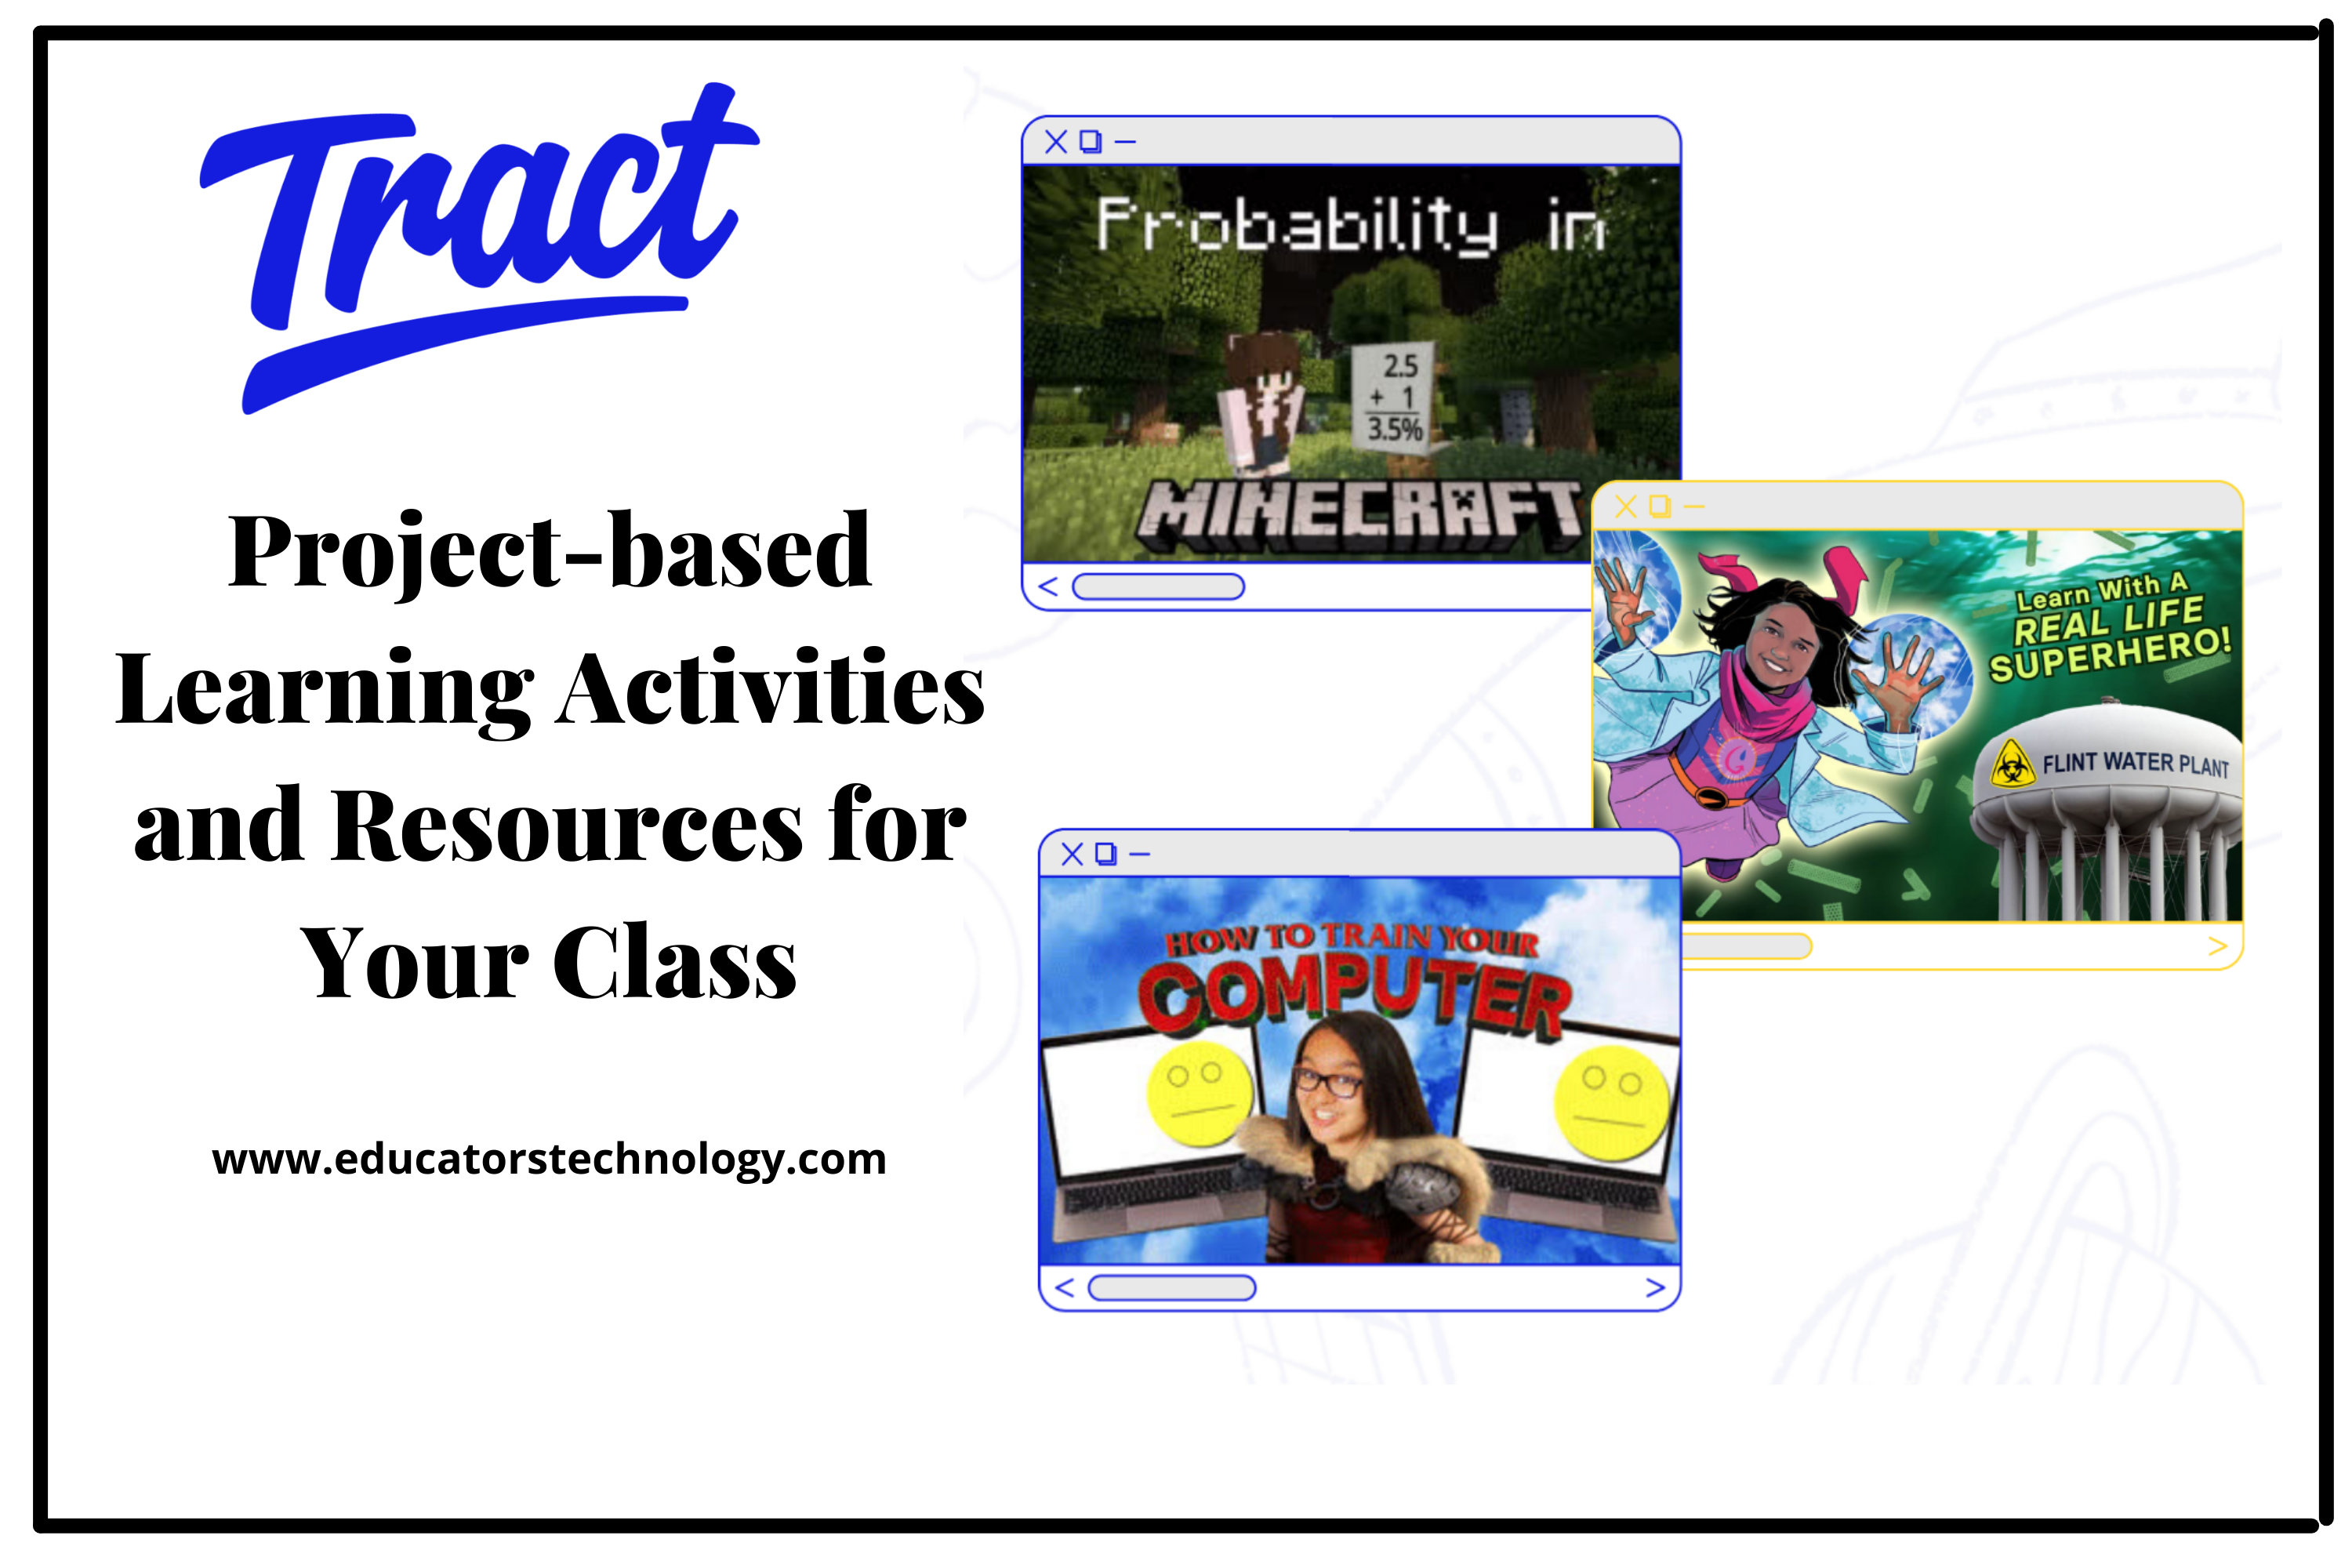 Tract Provides Project-based Learning Activities and Resources for Your Class